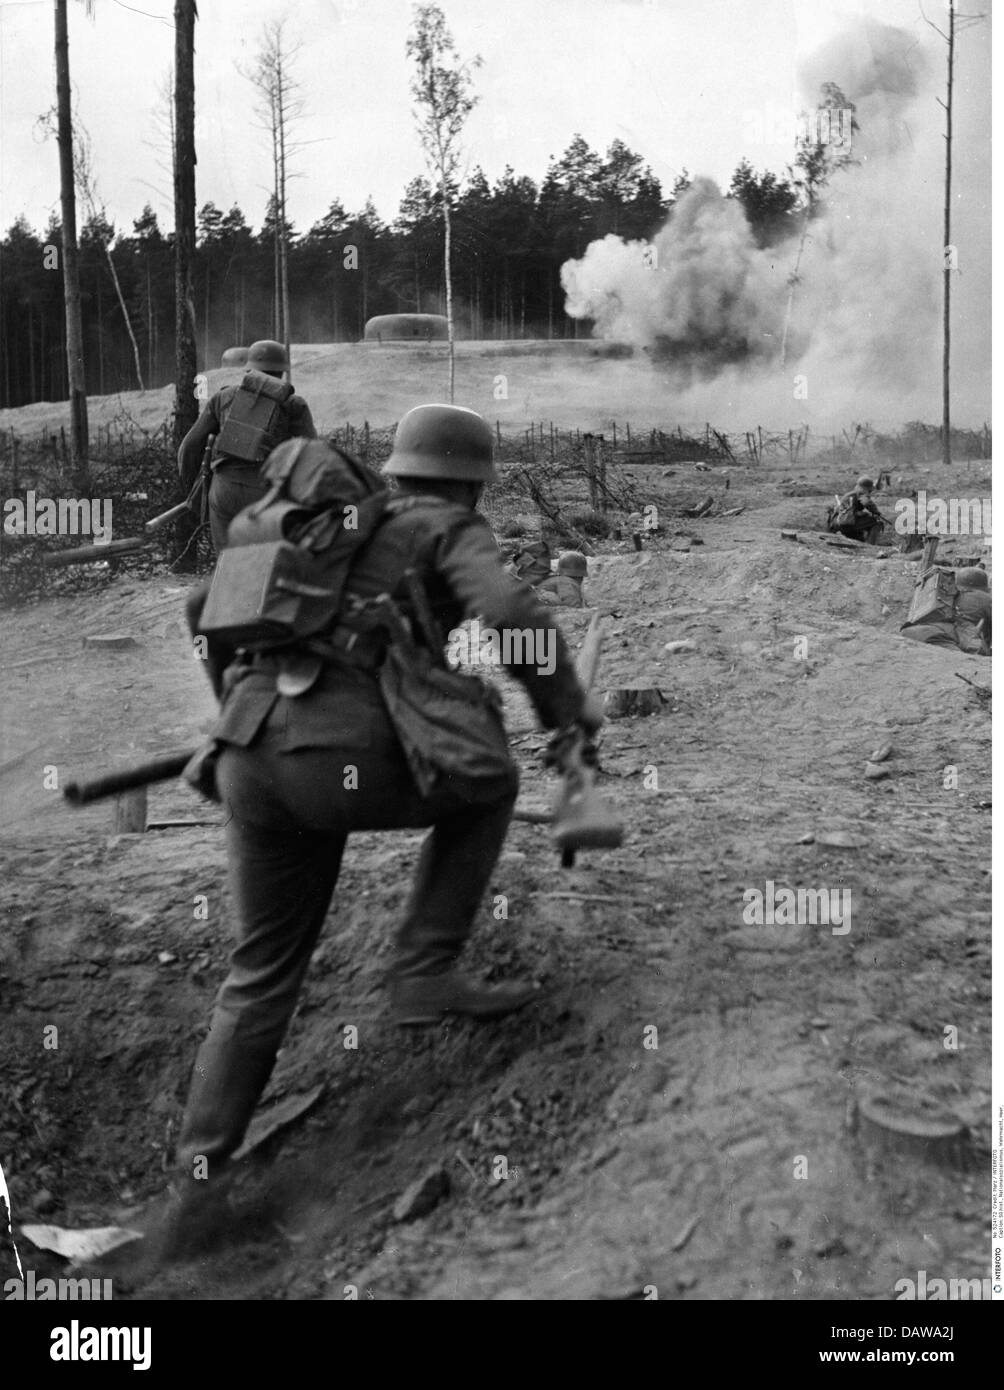 Nazism / National Socialism, military, Wehrmacht, army, training, military engineers, German assault pioneers during a field exercise, attack on bunkers, 15.8.1940, attacking soldiers, Additional-Rights-Clearences-Not Available Stock Photo